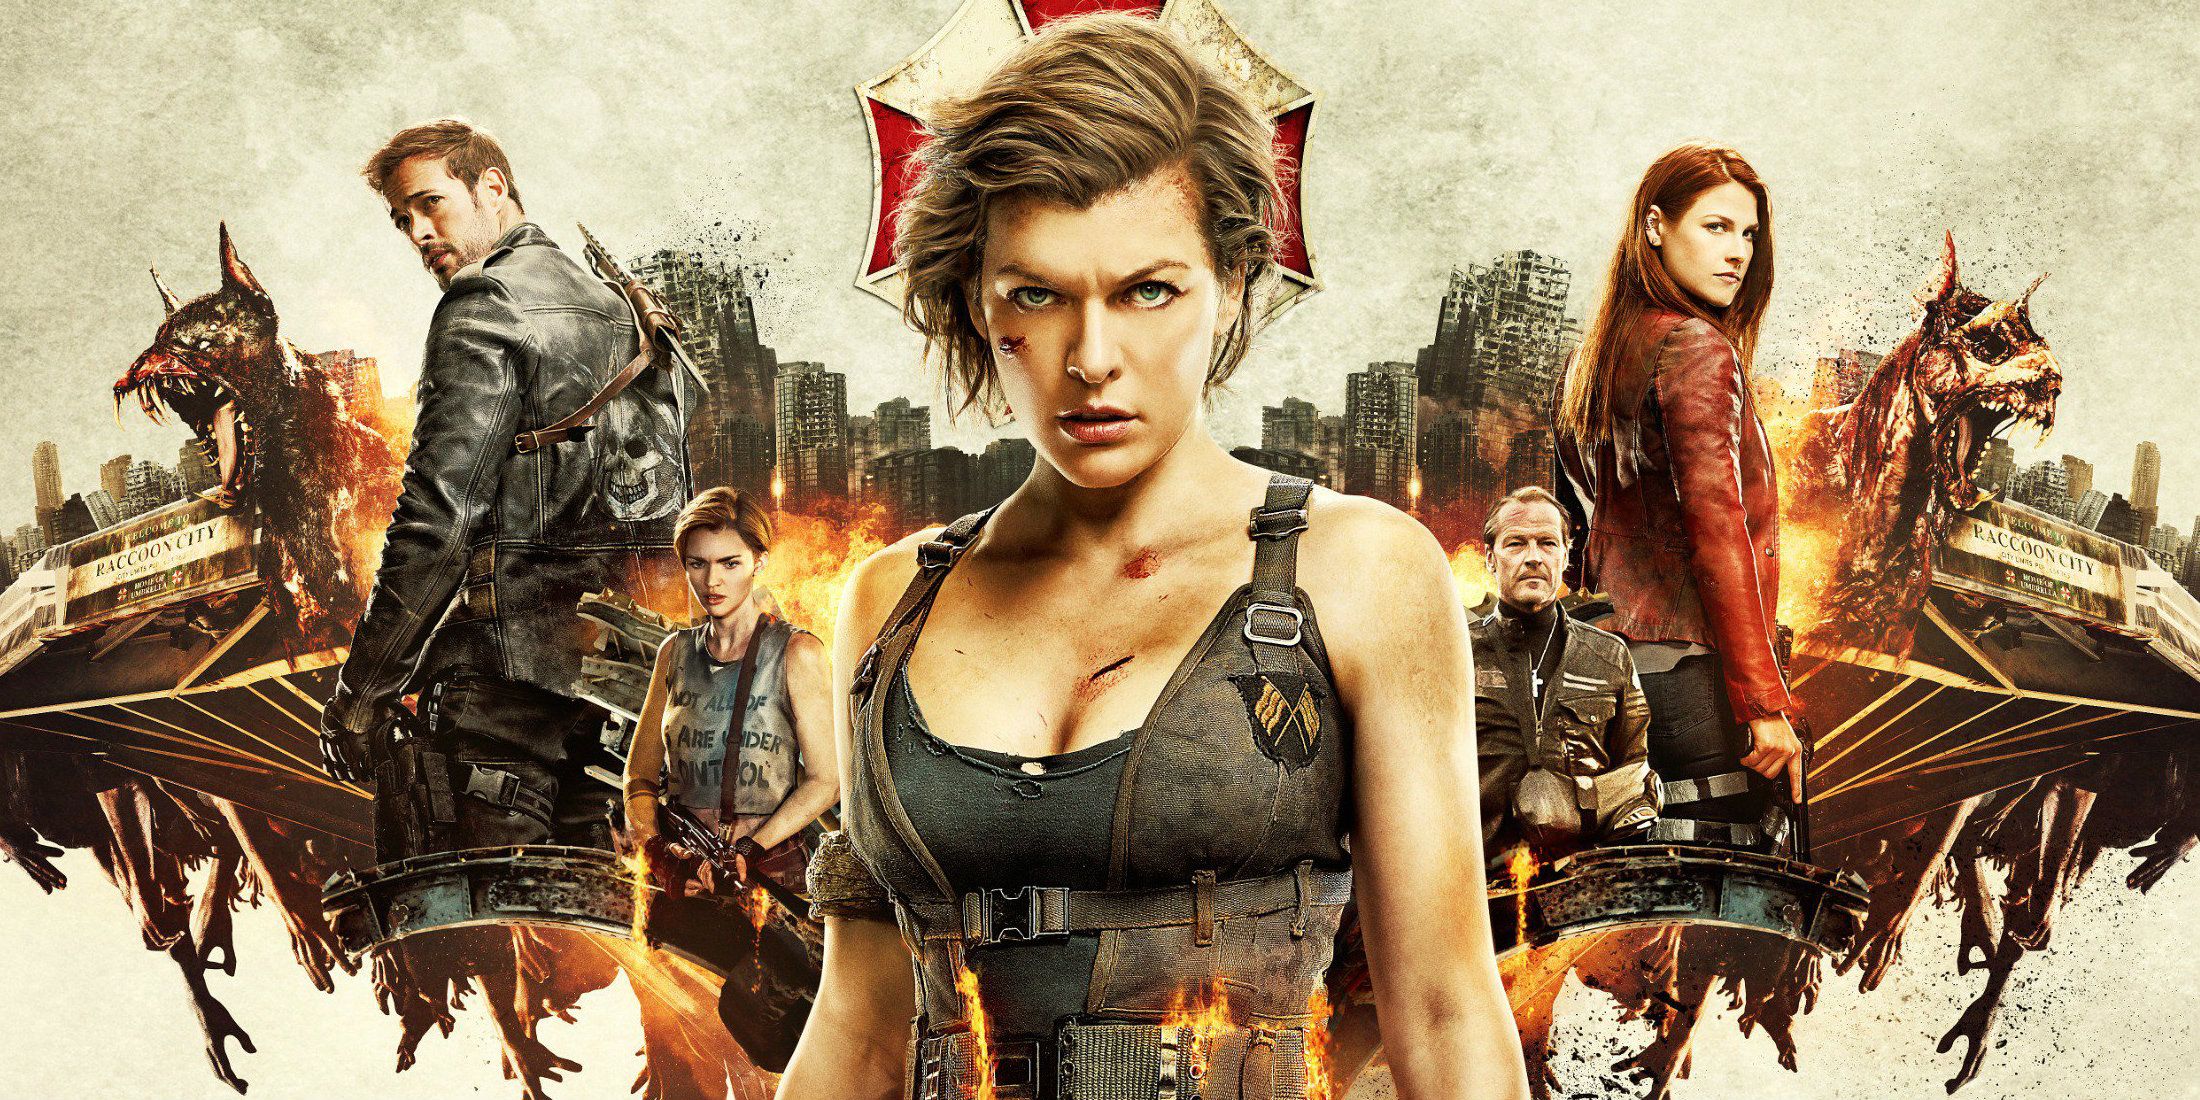 Ruby Rose gets down and dirty in new trailer for Resident Evil: The Final  Chapter